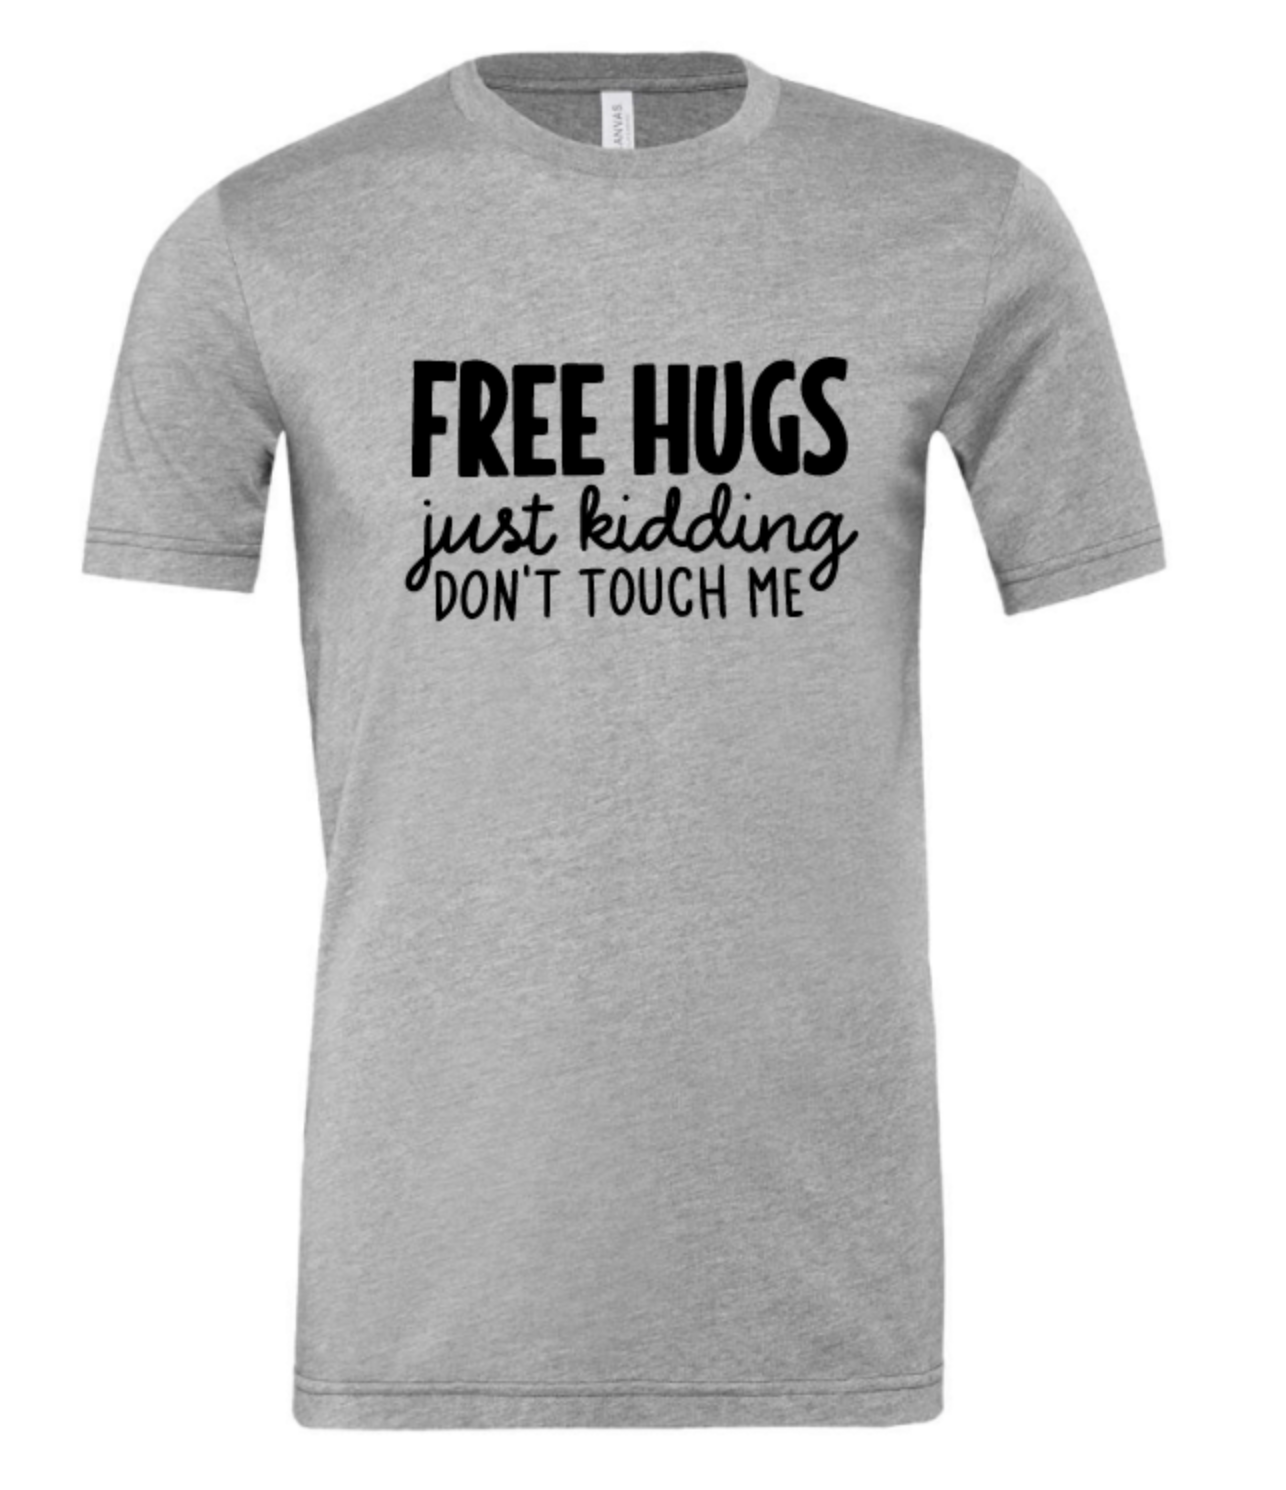 FREE HUGS JUST KIDDING DONT TOUCH ME